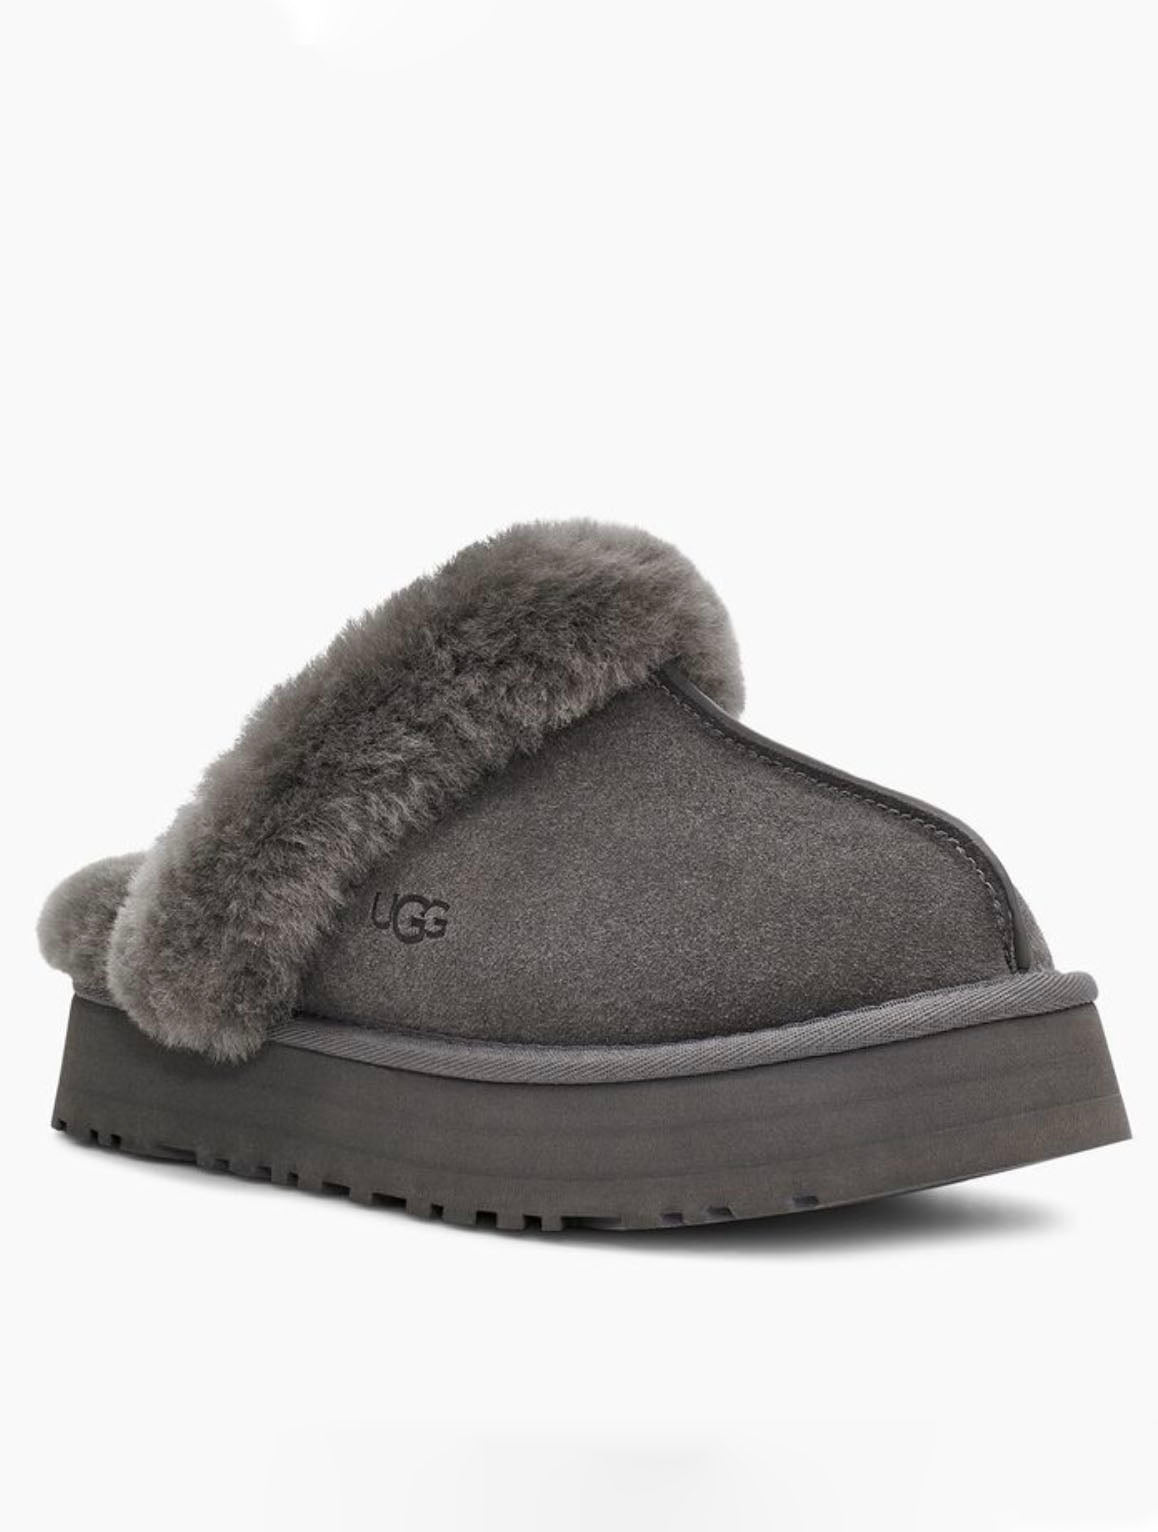 UGG Disquette Slipper in Charcoal